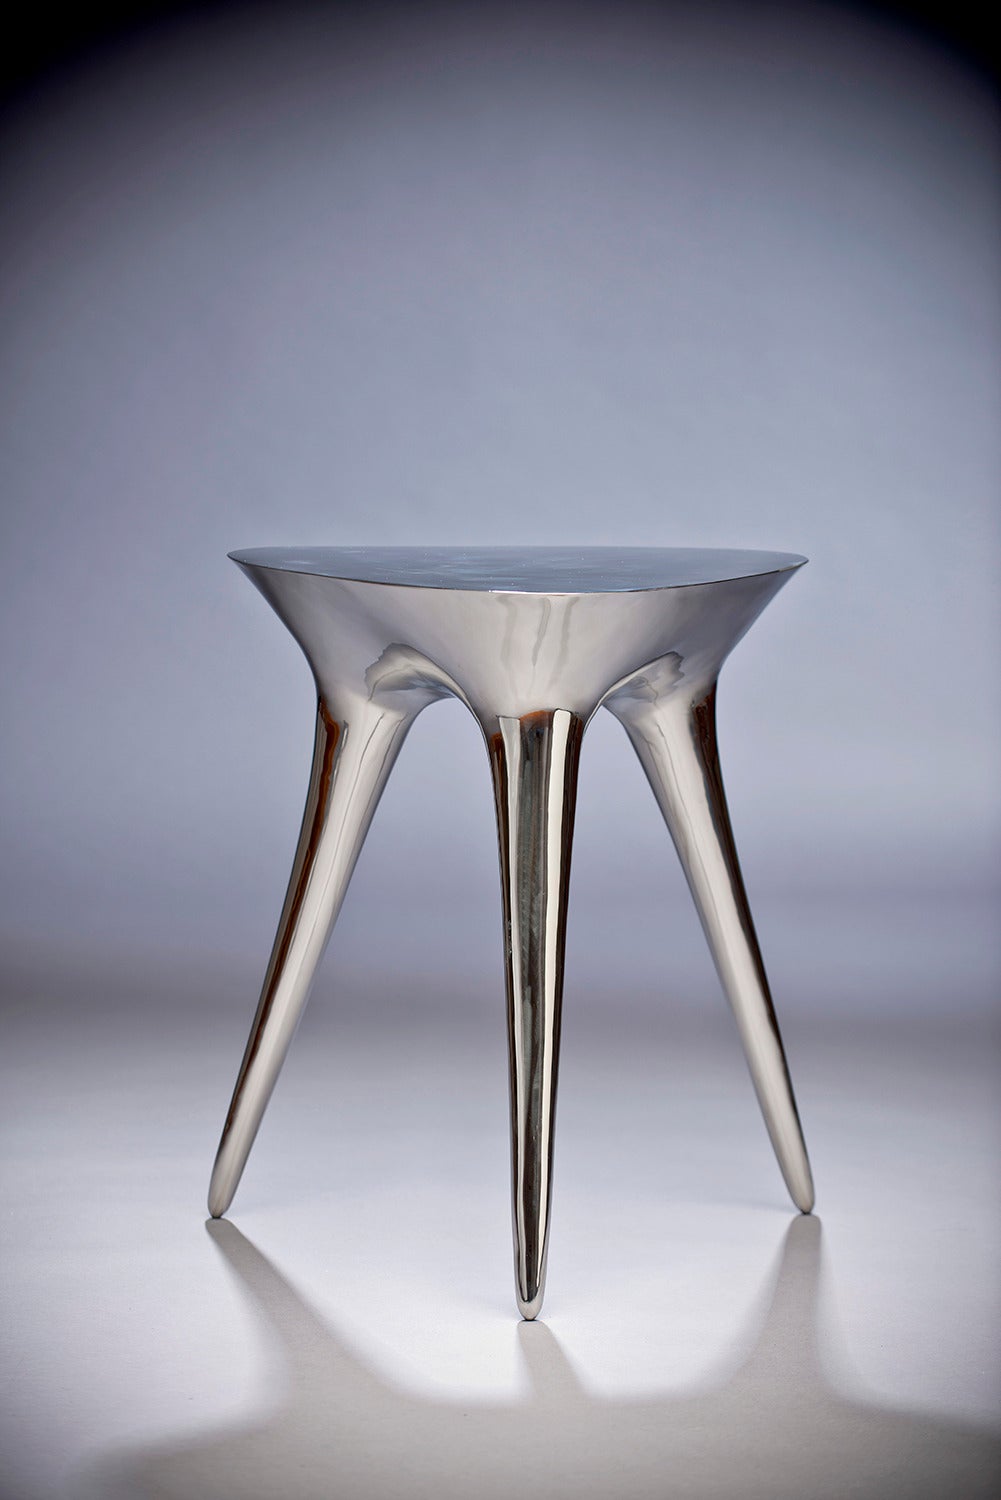 British Contemporary Chrome 8 Tables in Stainless Steel (Edition 3 of 12)